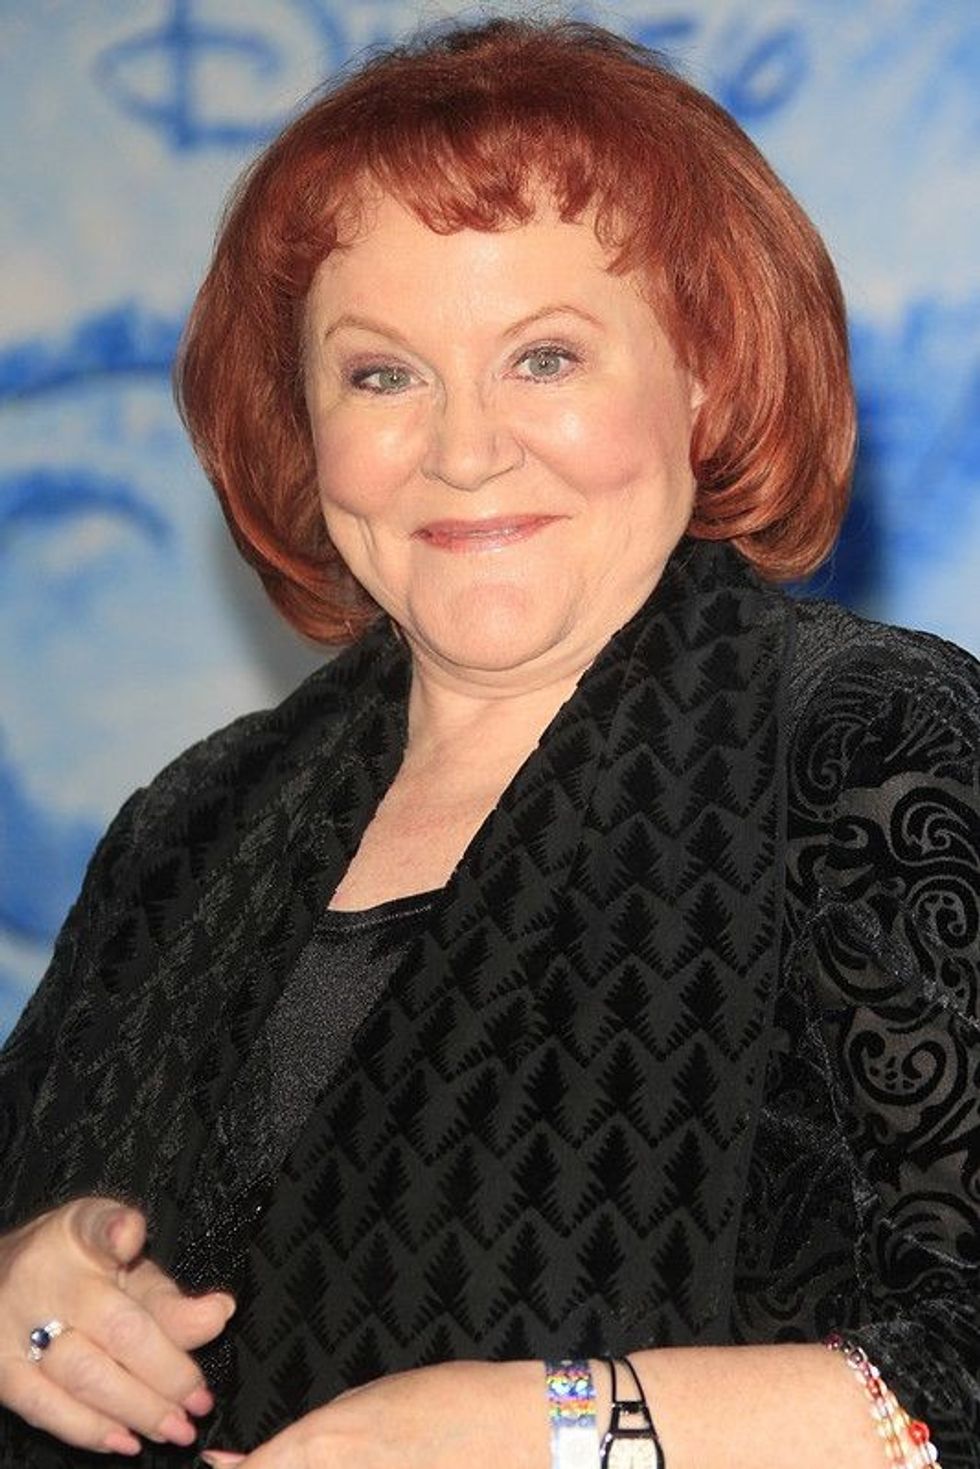 Edie Mcclurg is known for acting in some of the most iconic movies in the past few decades.